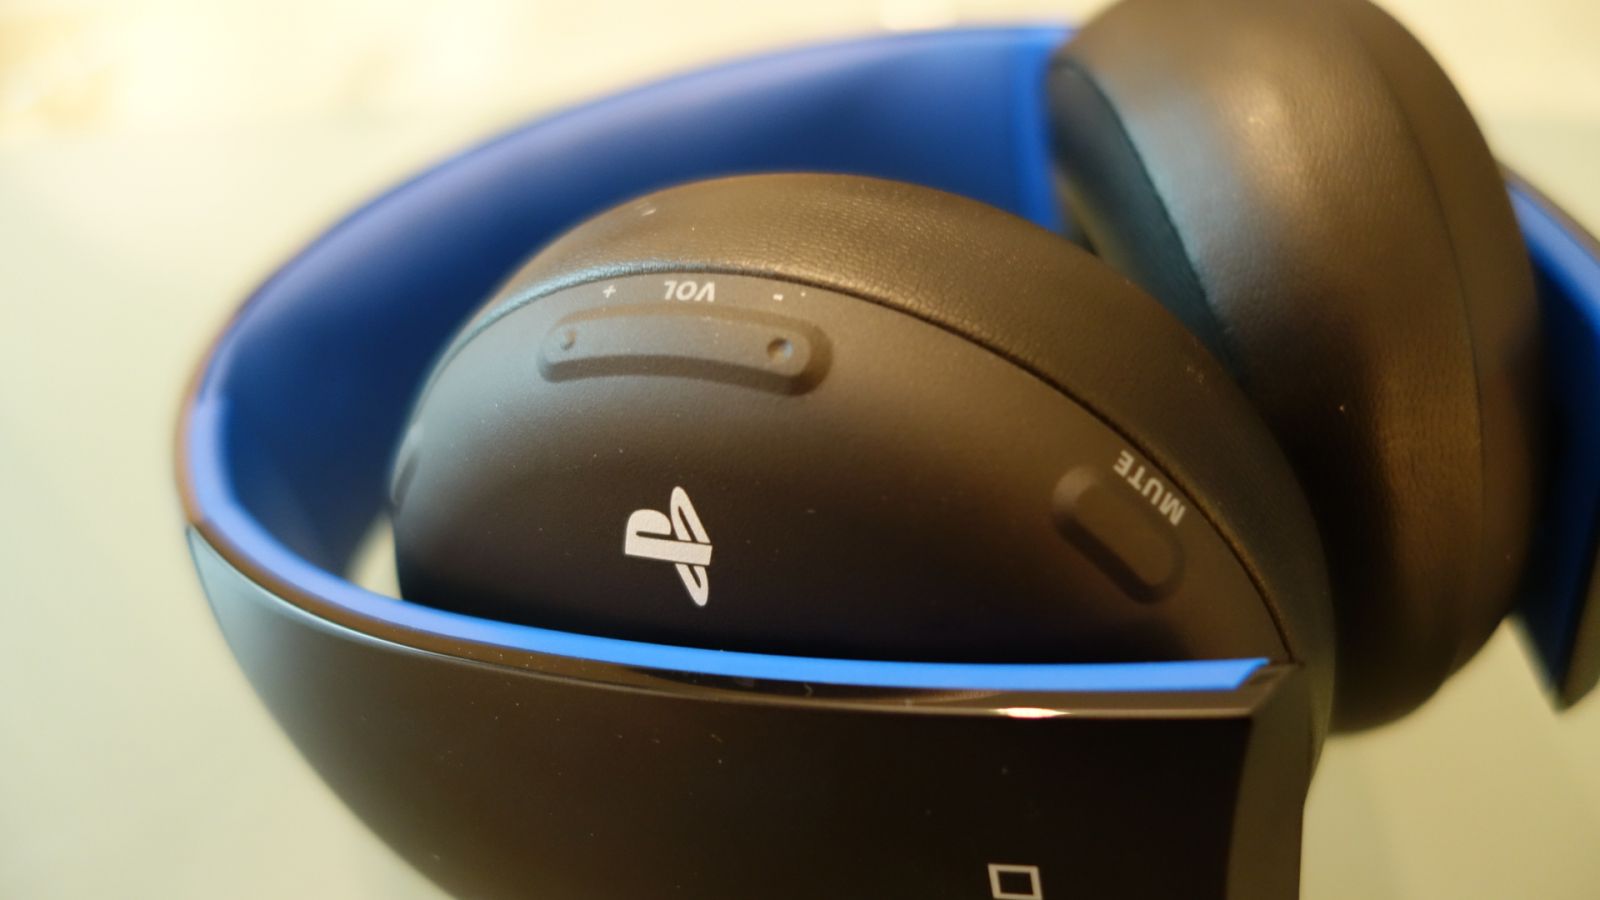 Sony Playstation Gold Gaming Headset 2 Review Samma3a Tech